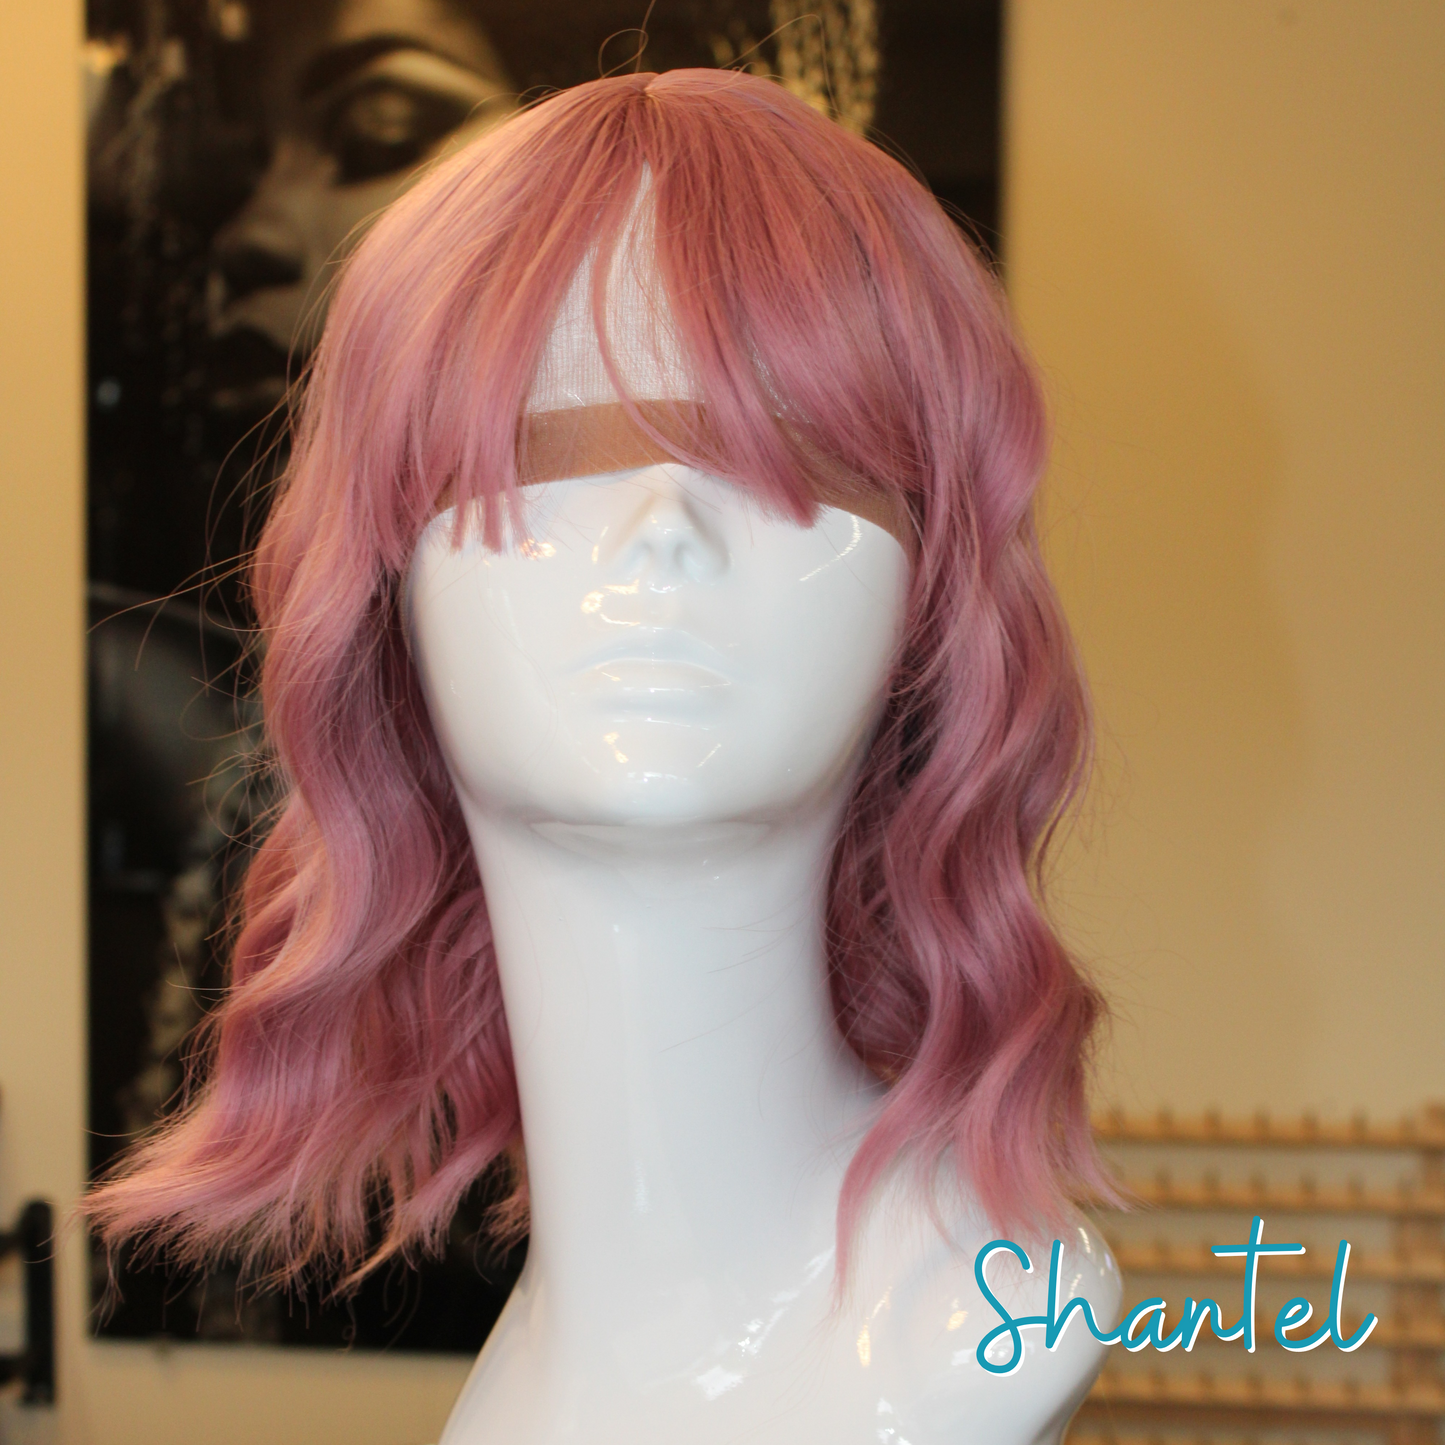 Shantel - 14", Body Wave, Synthetic Wig - Pink